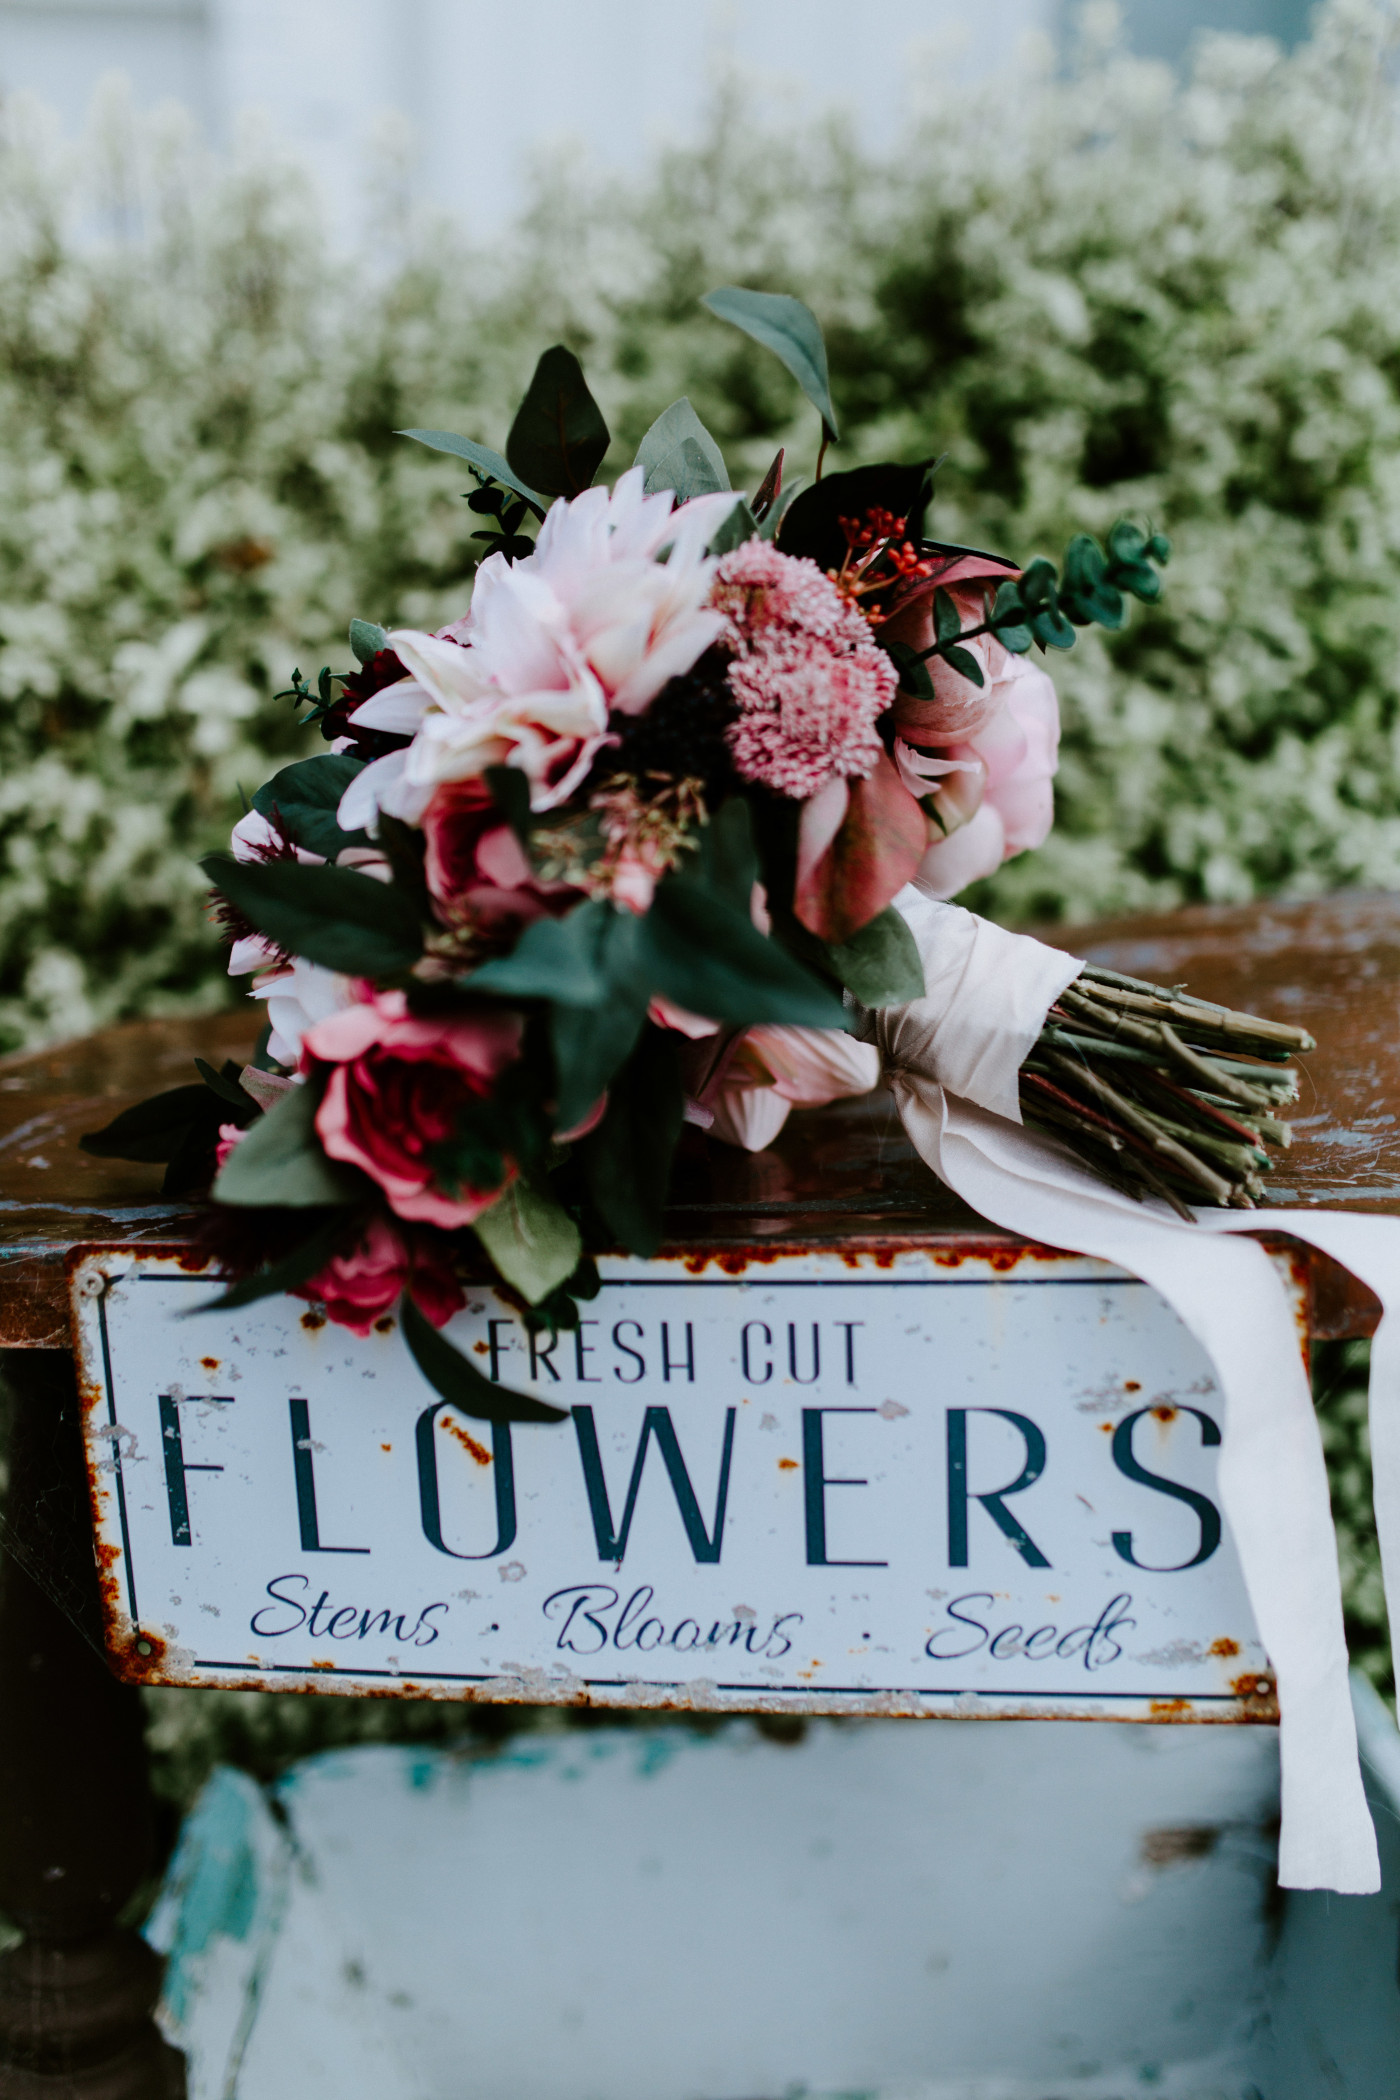 Hannah's flowers sit on top of a sign.